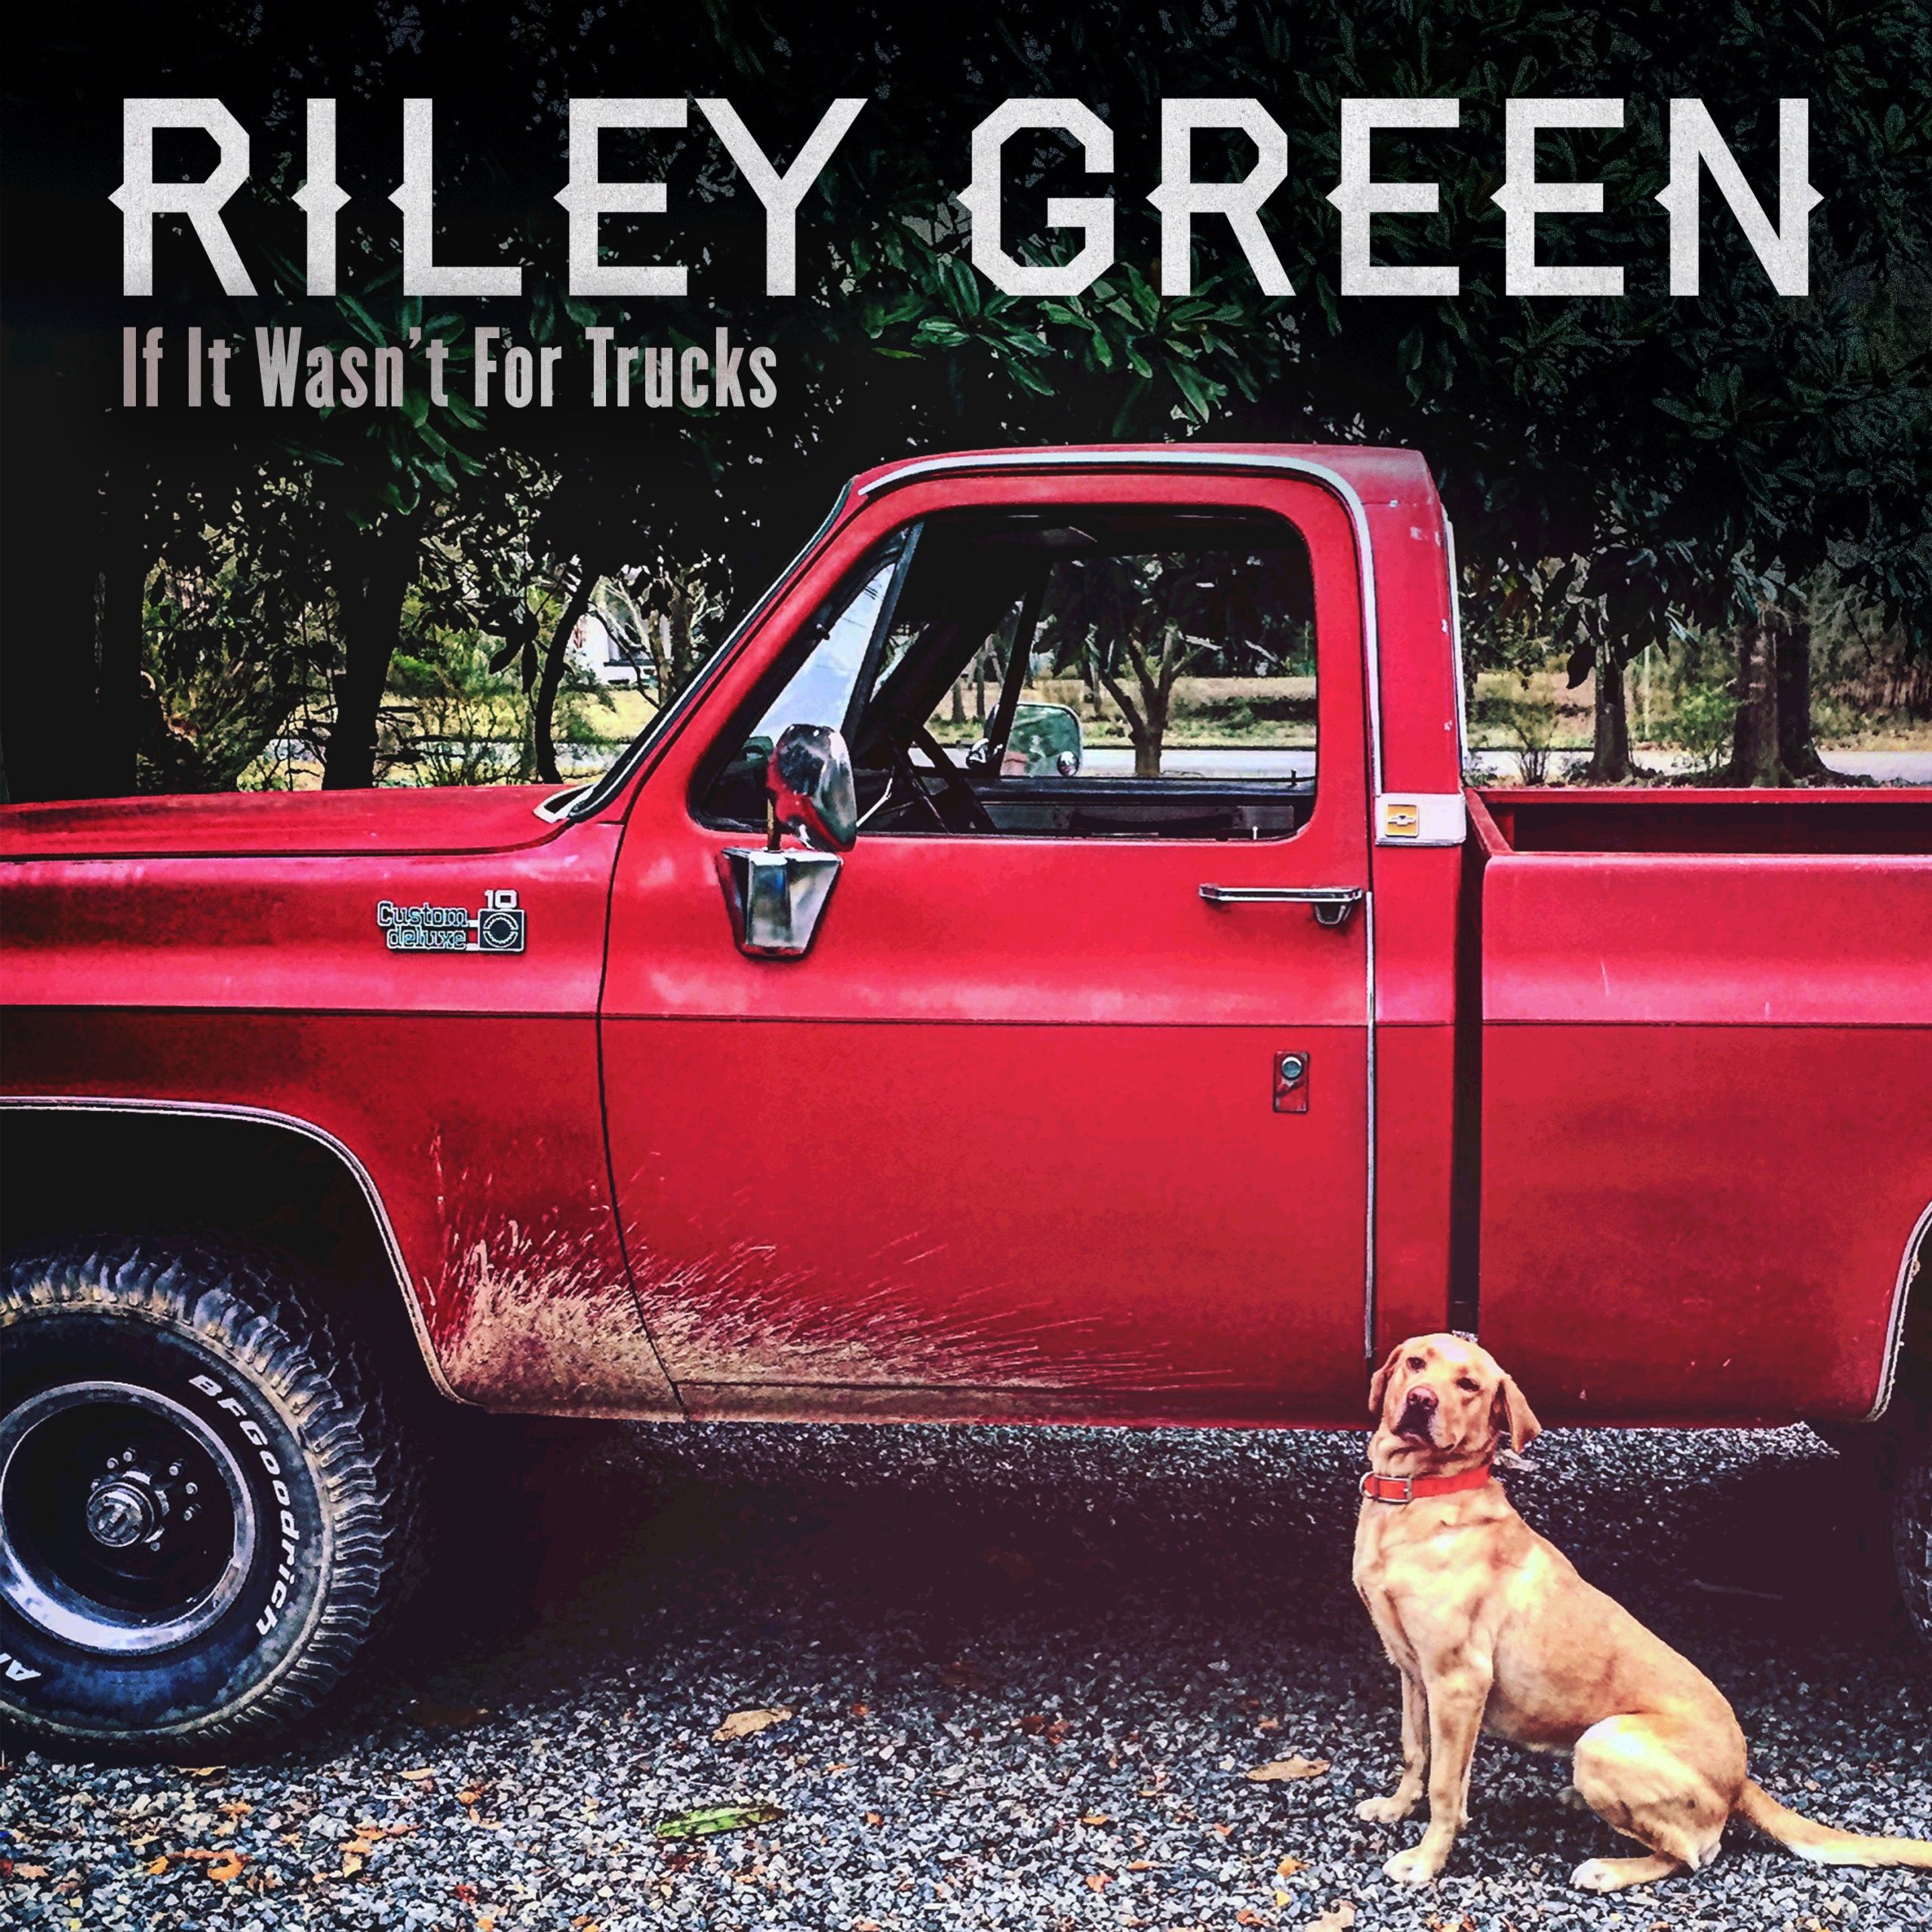 What's the Hype with Riley Green? – The Sentry